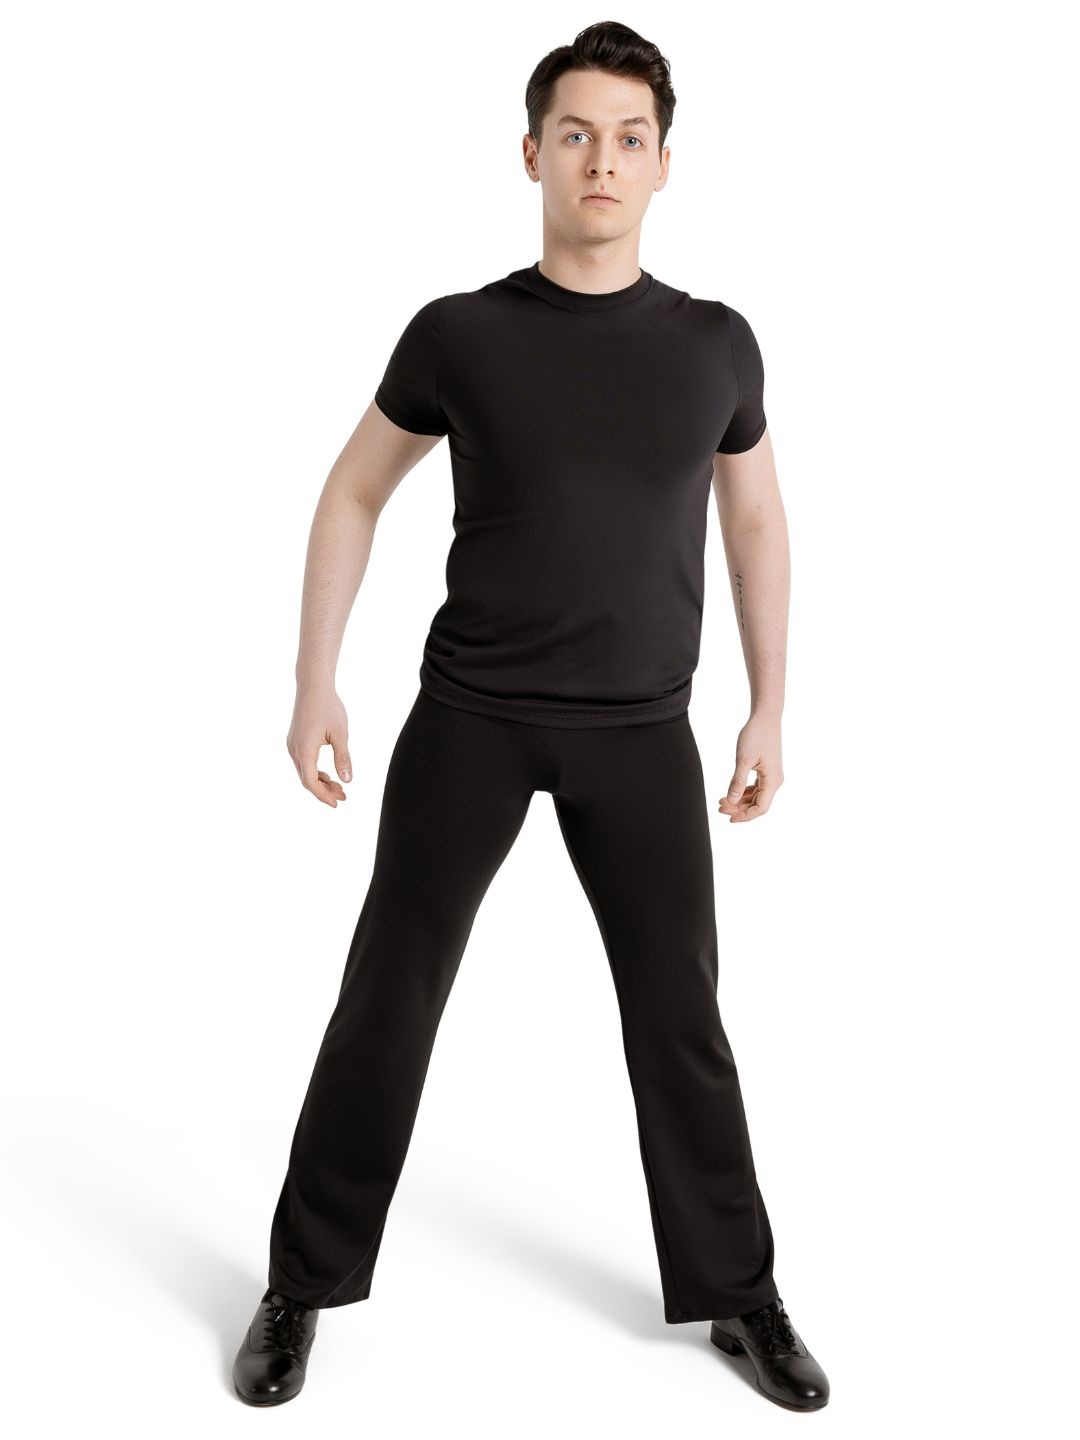 Capezio Mens Dance Tights, Dance Tights Men Can Wear For Many